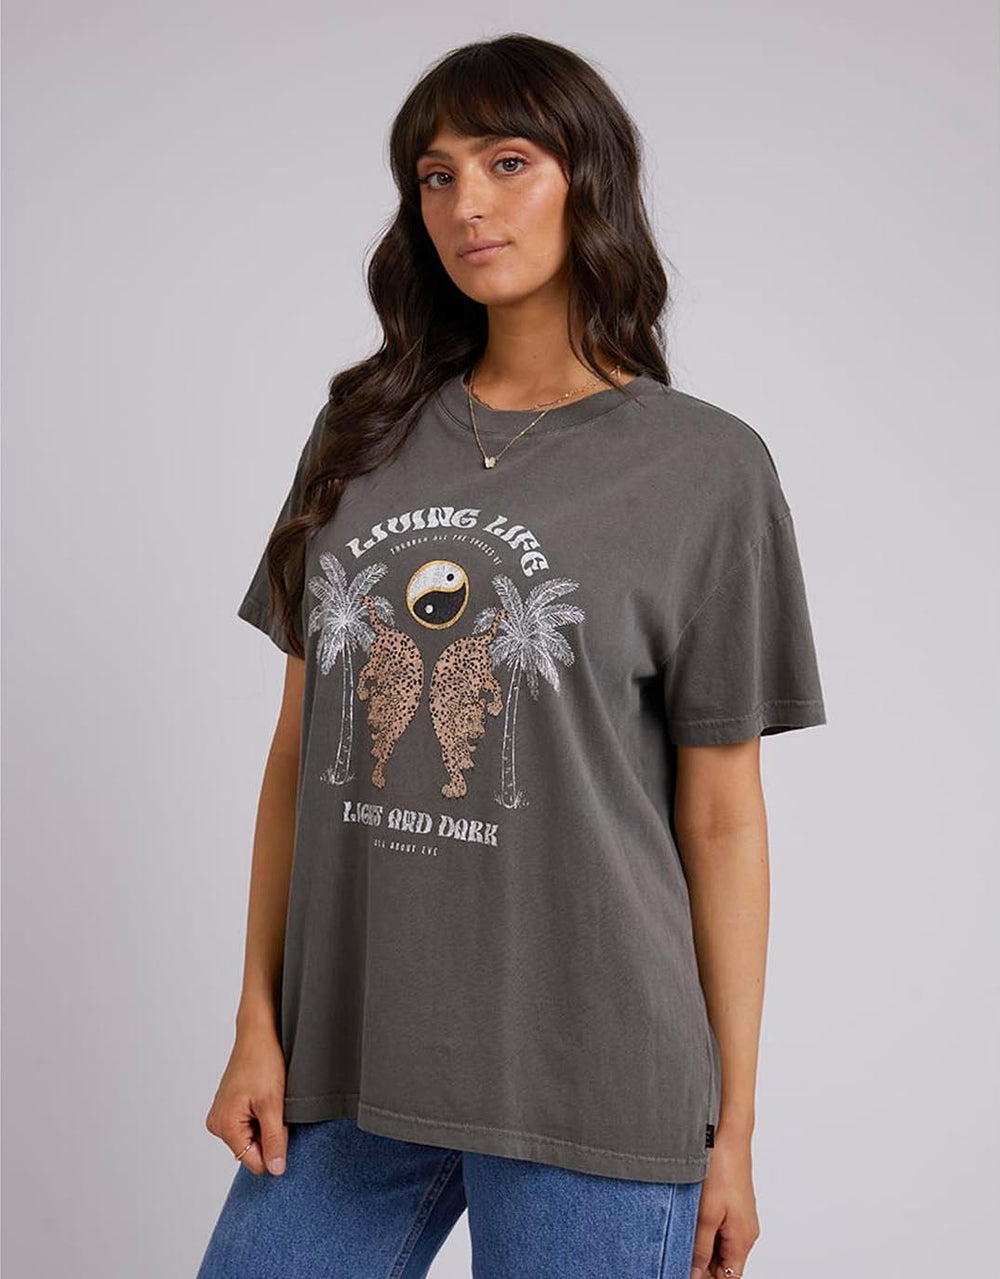 All About Eve - Living Life Standard Tee - Charcoal - paulaglazebrook Tops